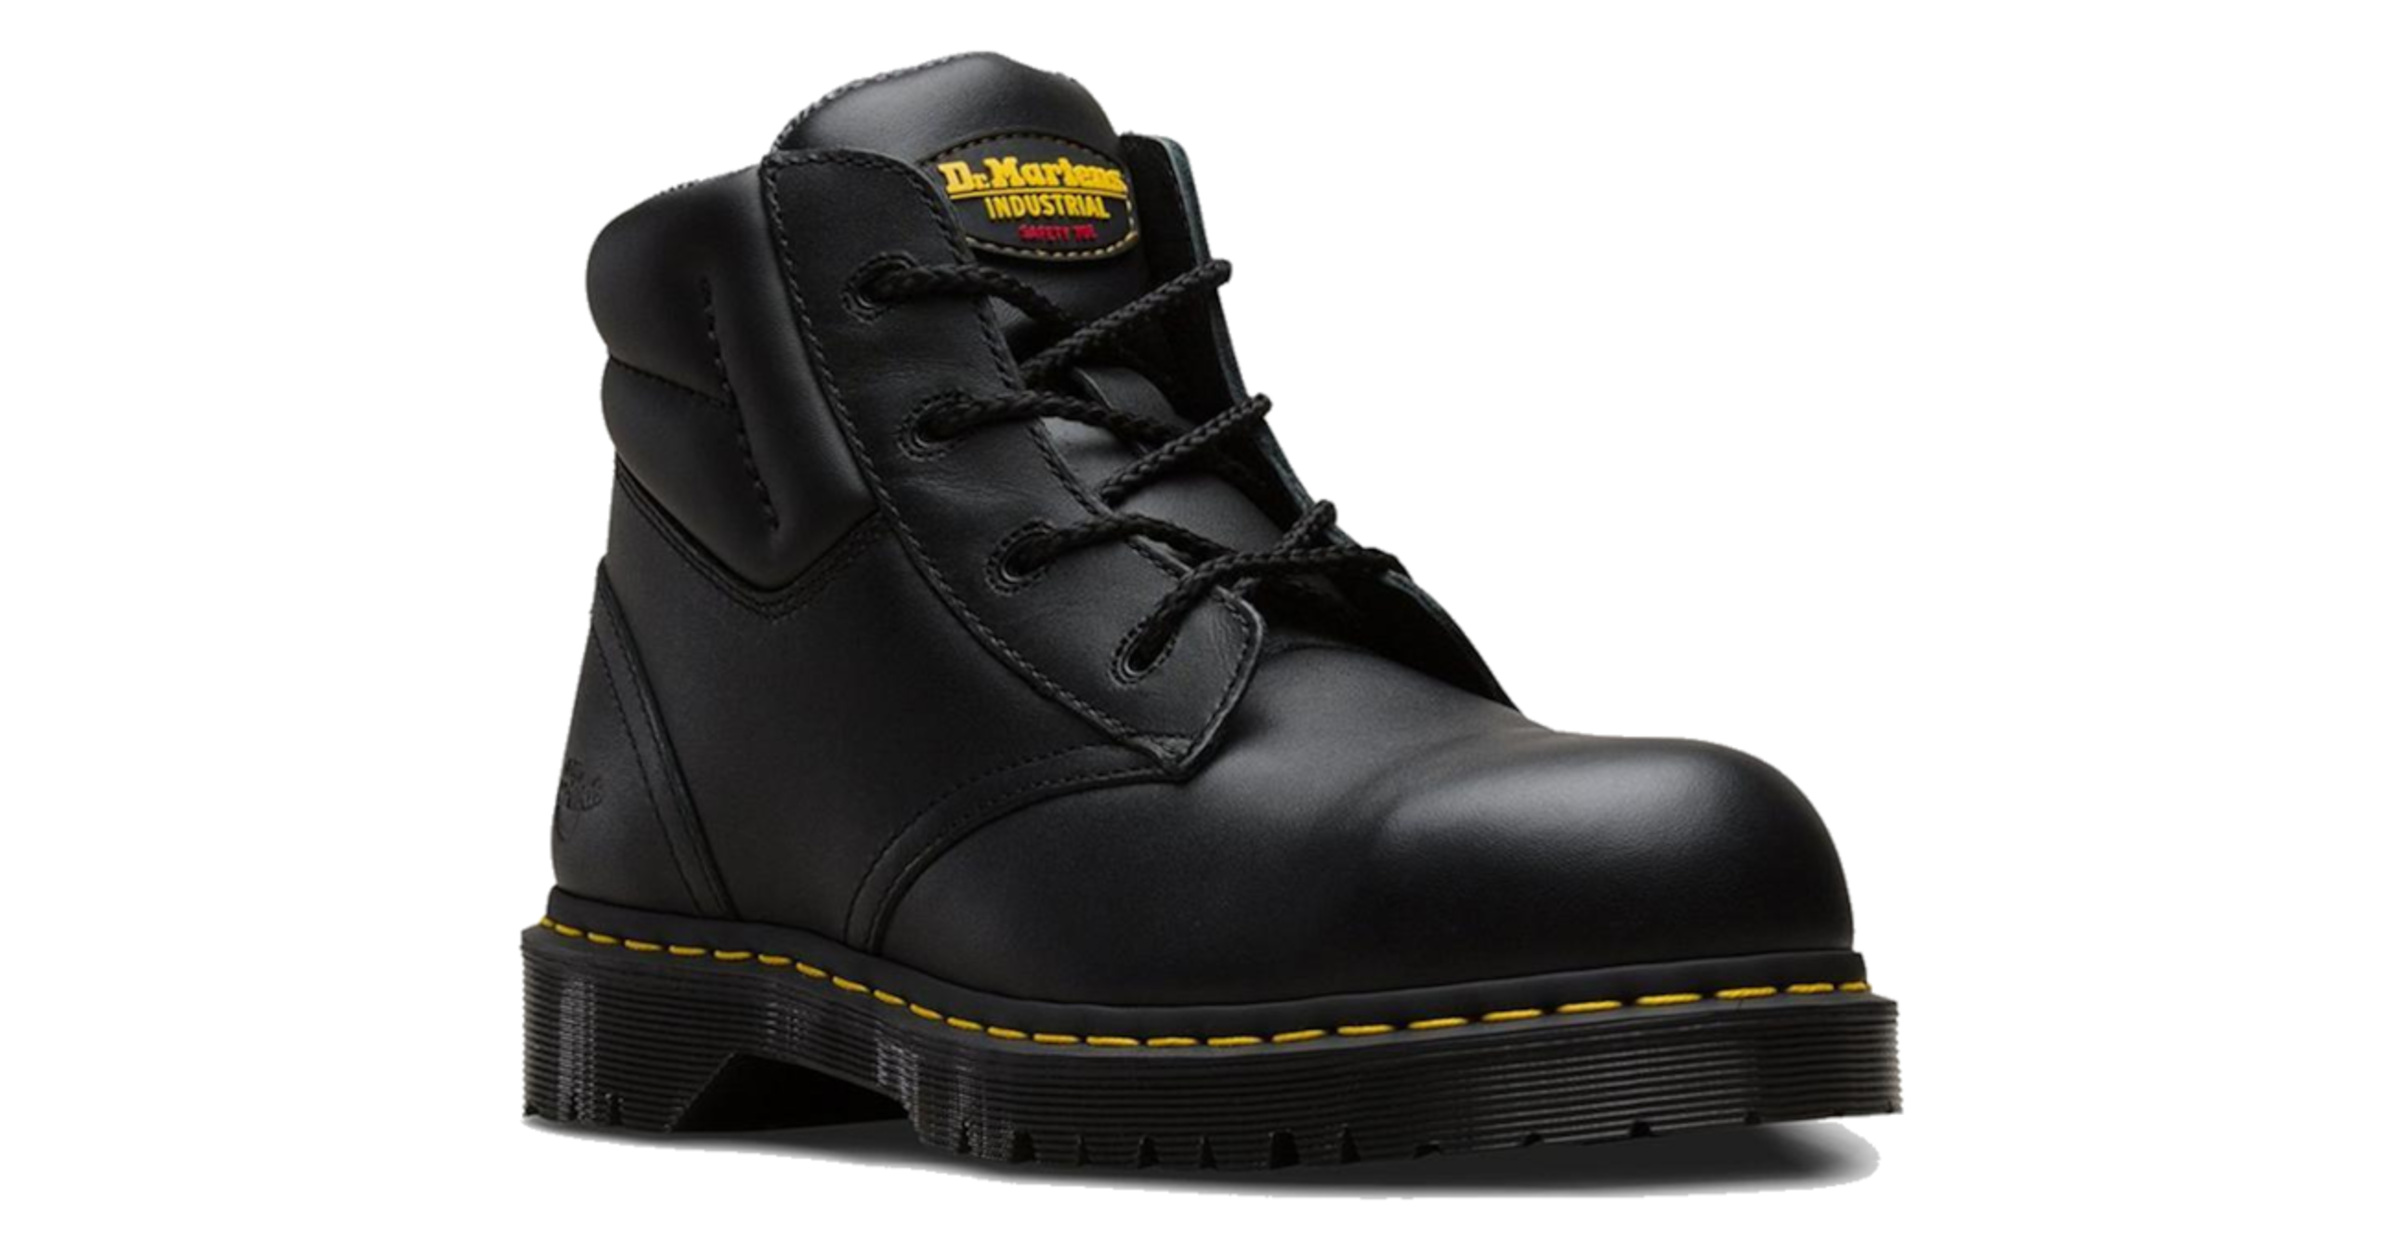 Safety Boots | AAP Wholesale Ltd. T/A Tiger Safety